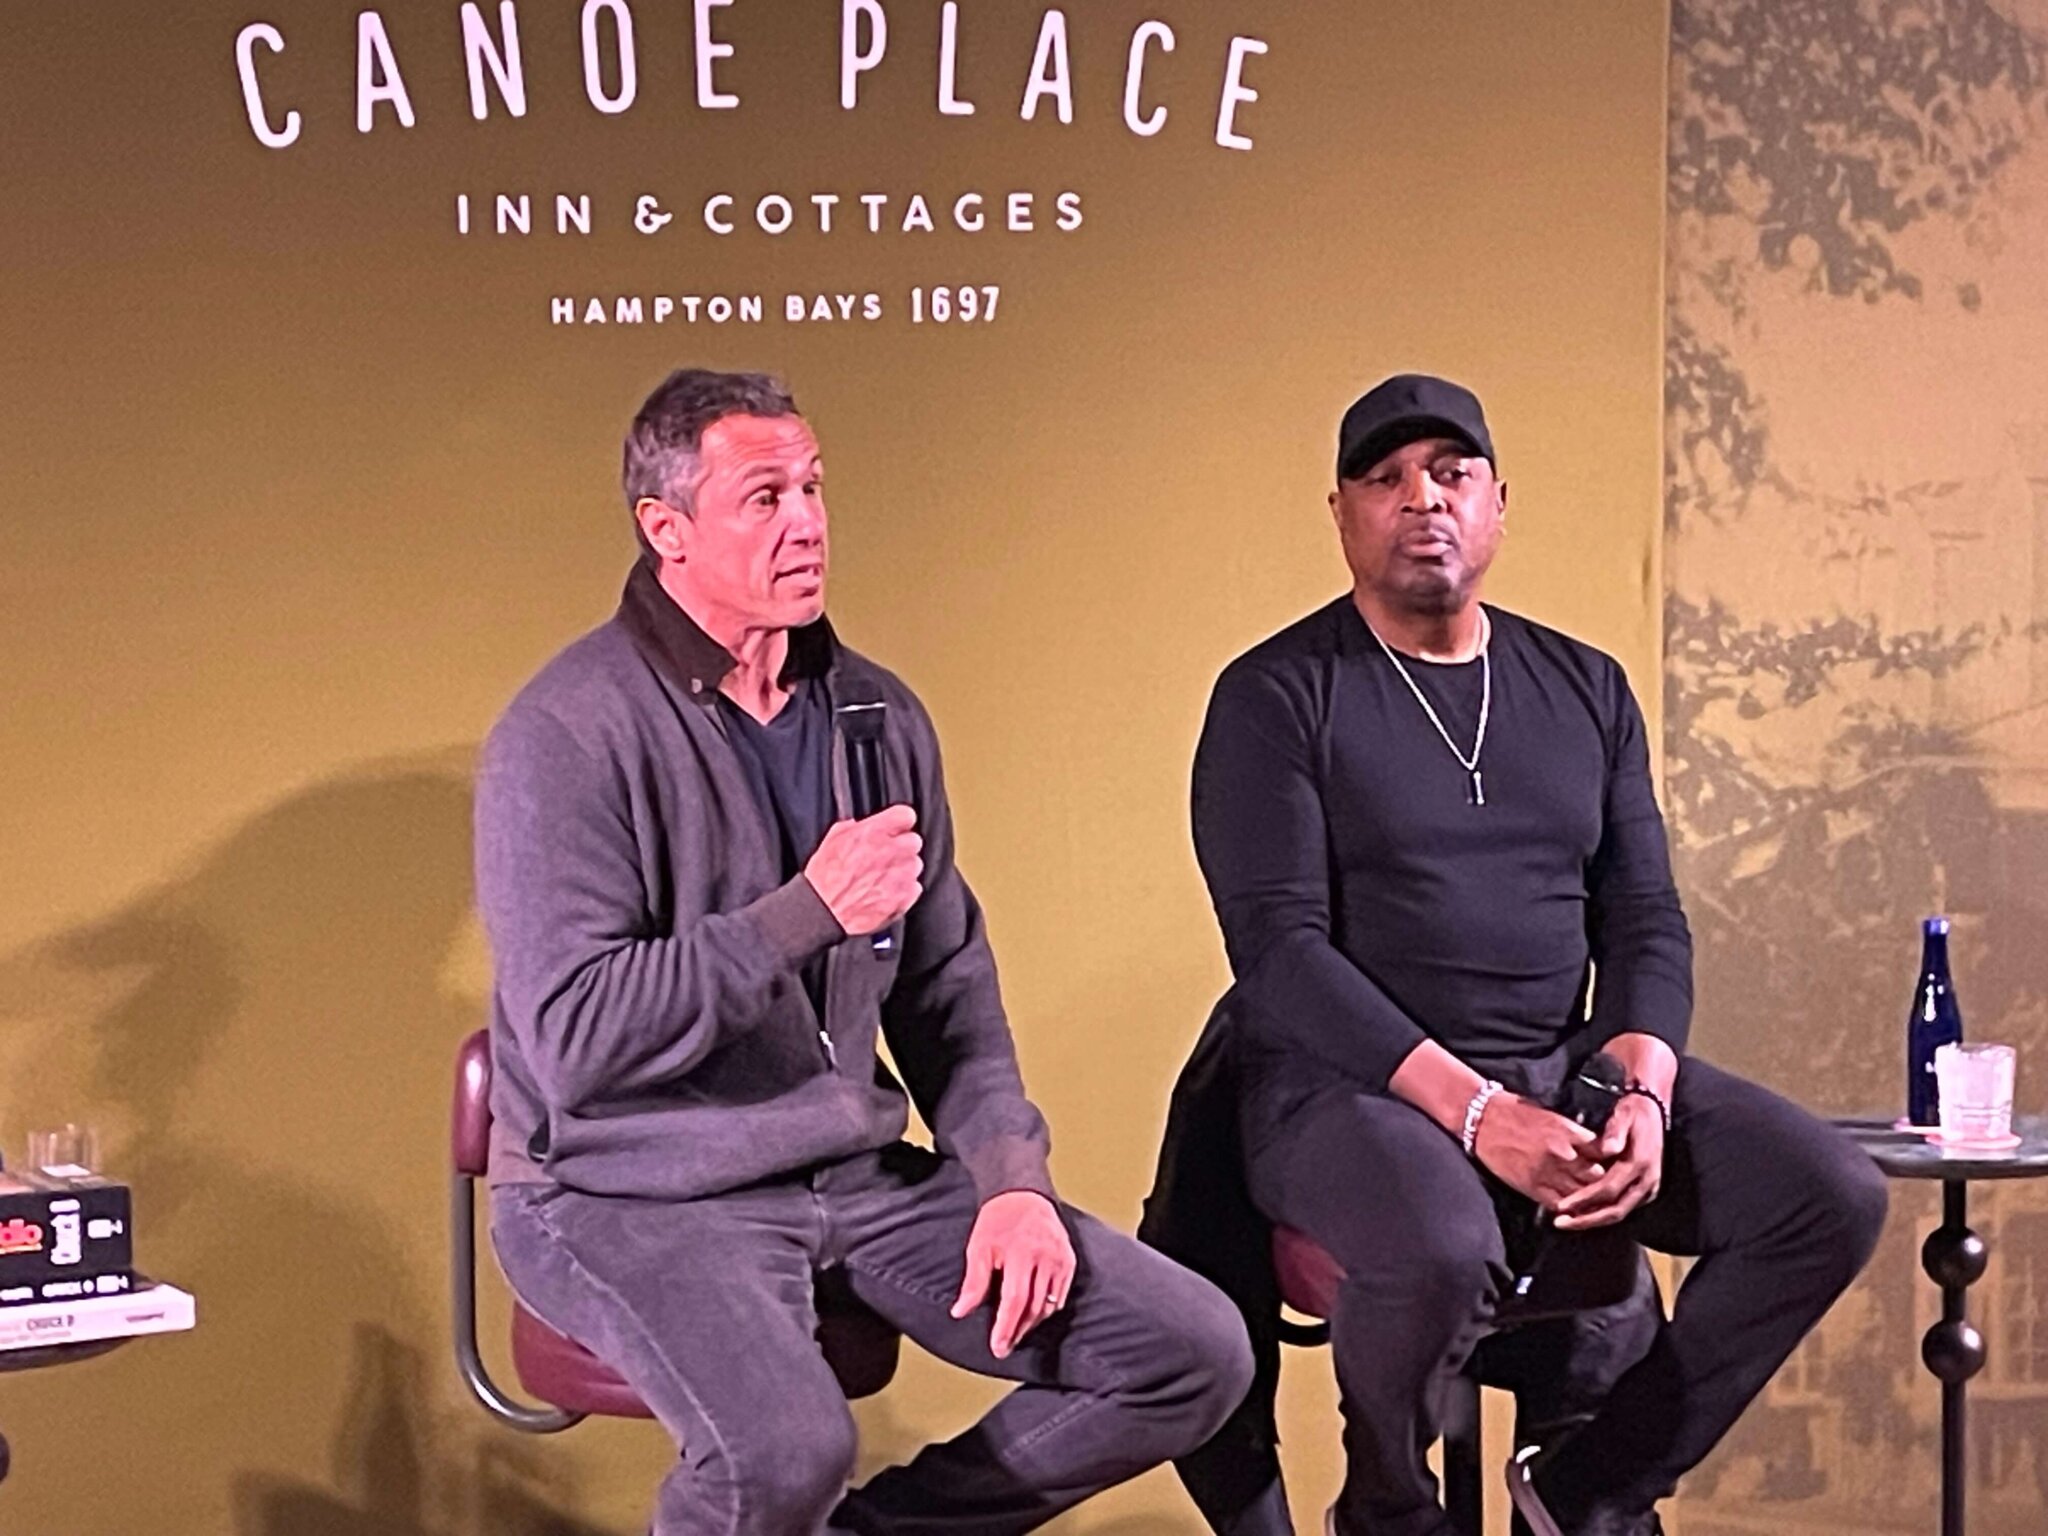 Chris Cuomo and Chuck D at Canoe Place